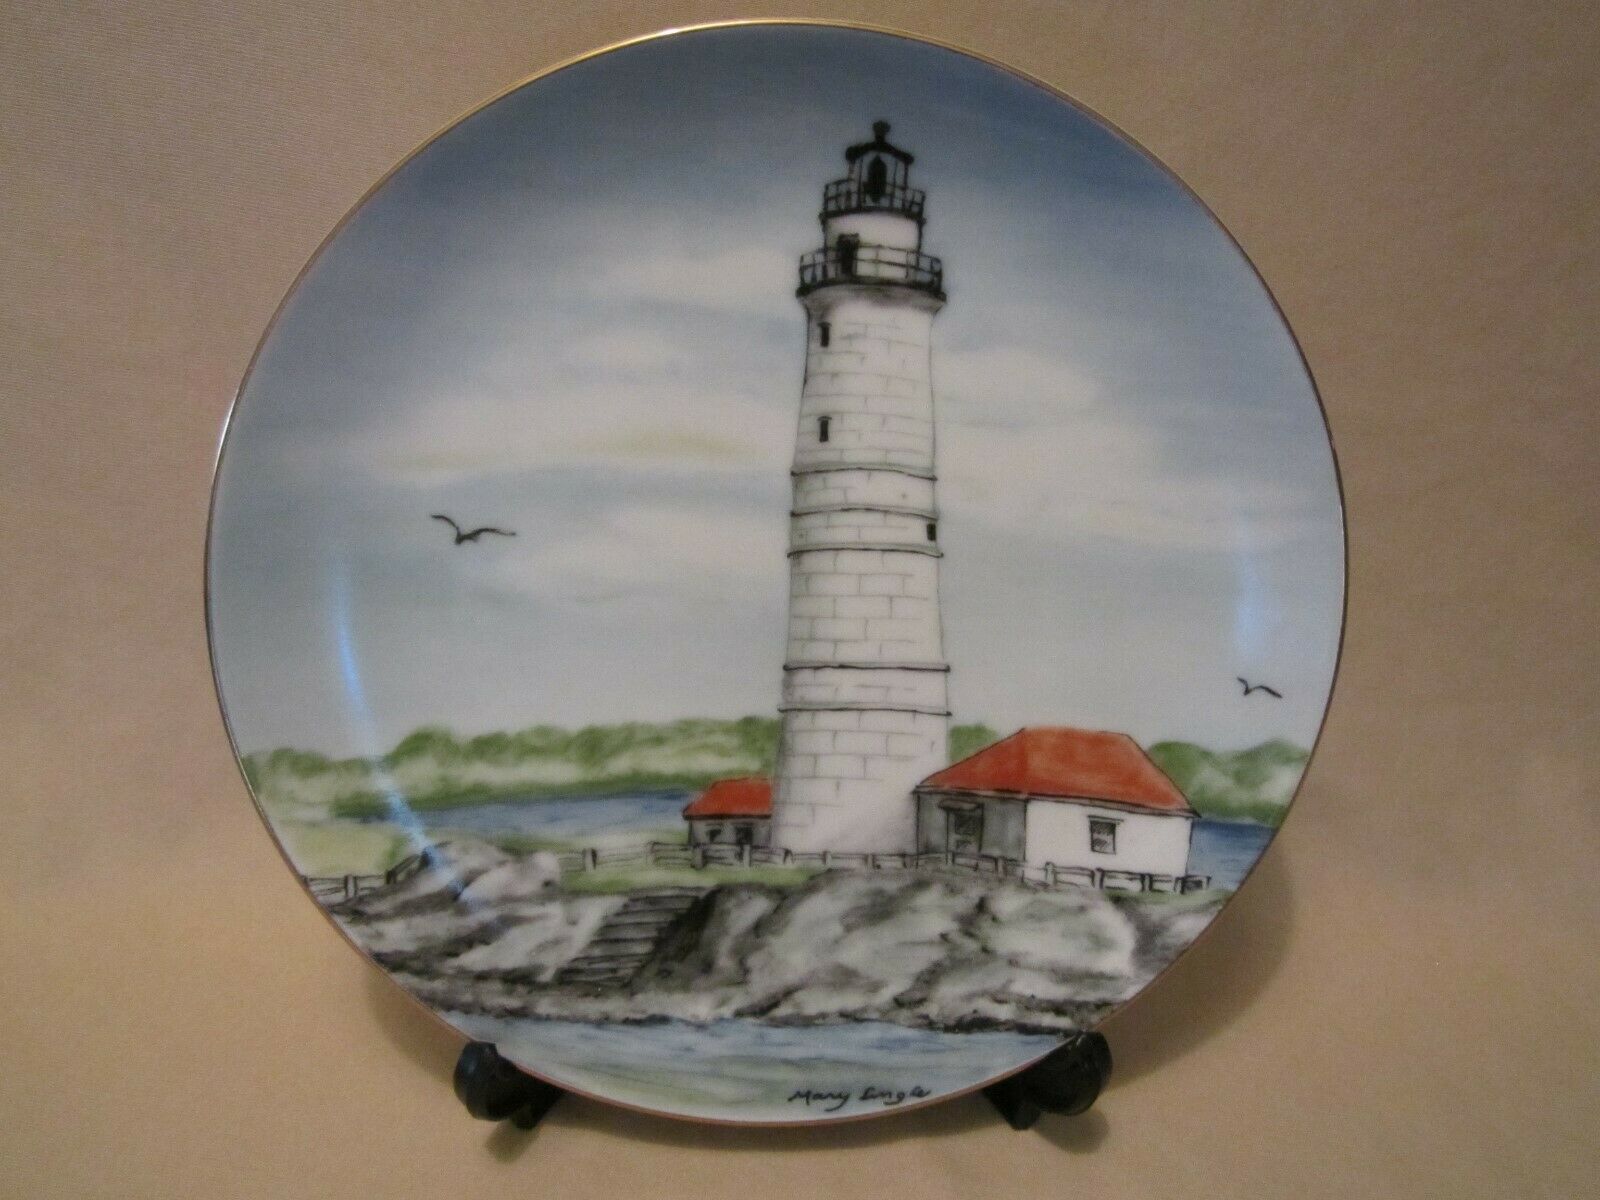 BOSTON HARBOR LIGHTHOUSE collector plate LEFTON HISTORIC AMERICAN LIGHTHOUSE - $24.99